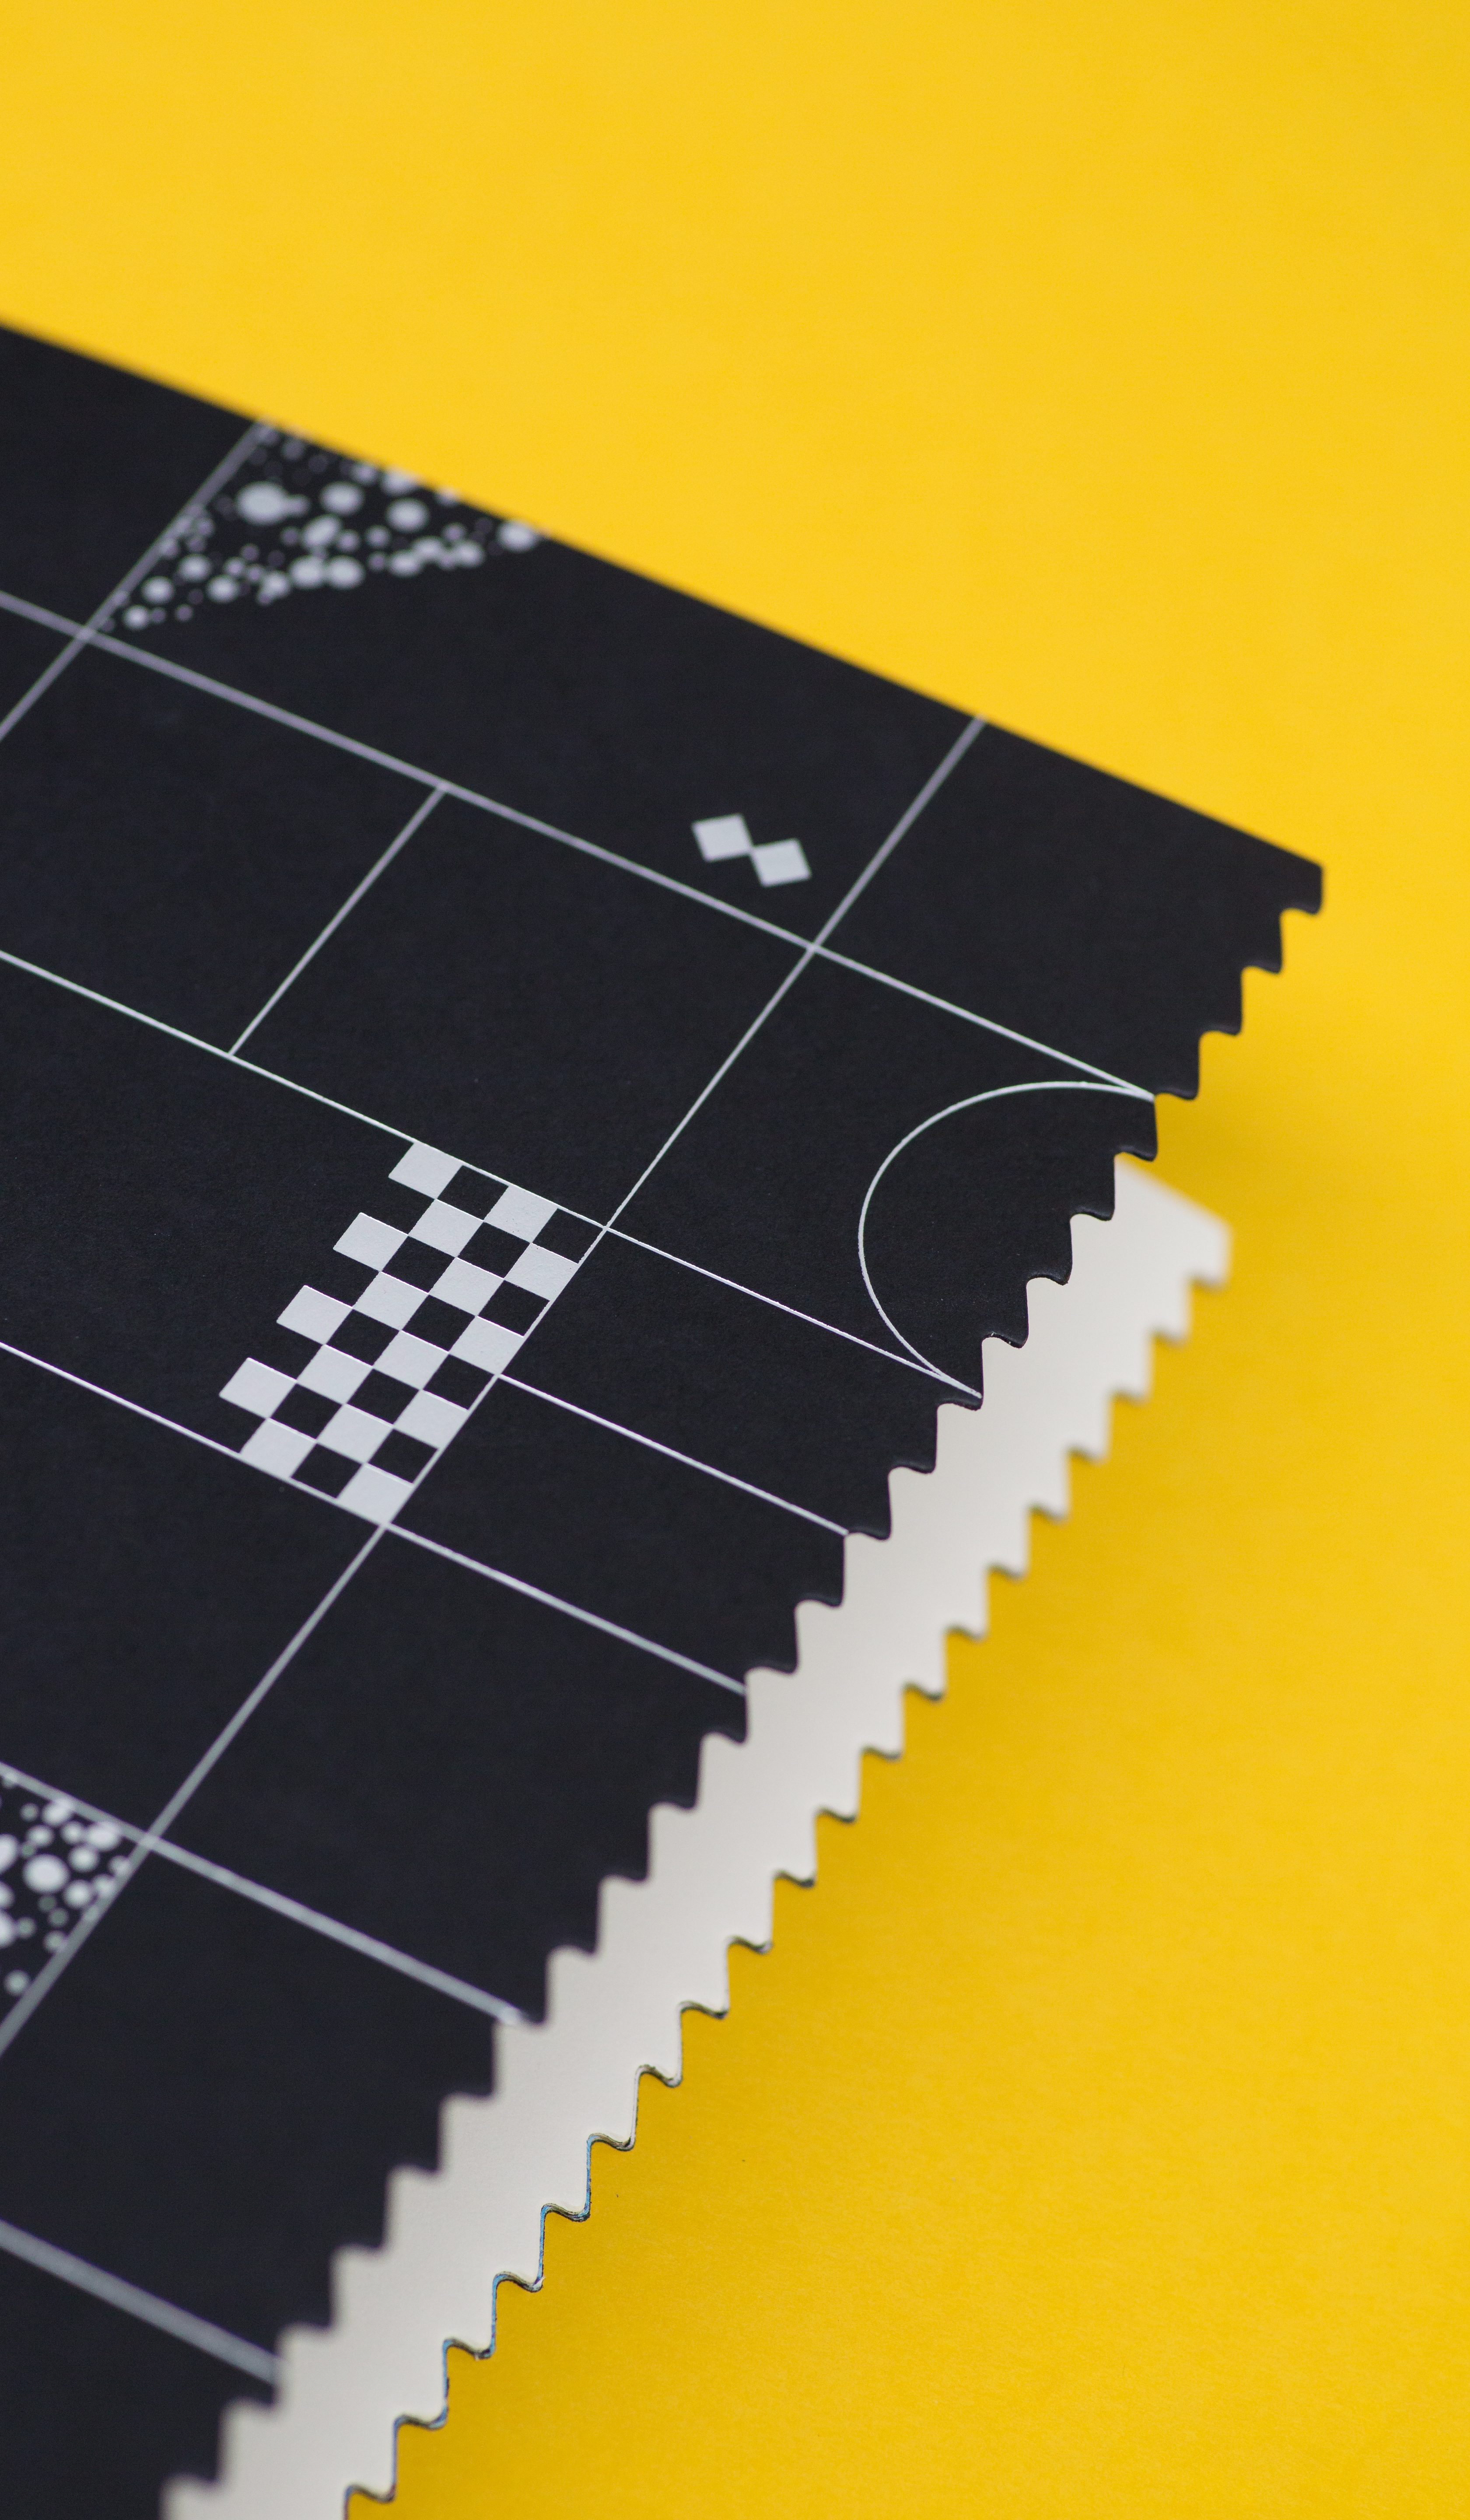 Diecut details on each book contribute to the tactile quality of each object.